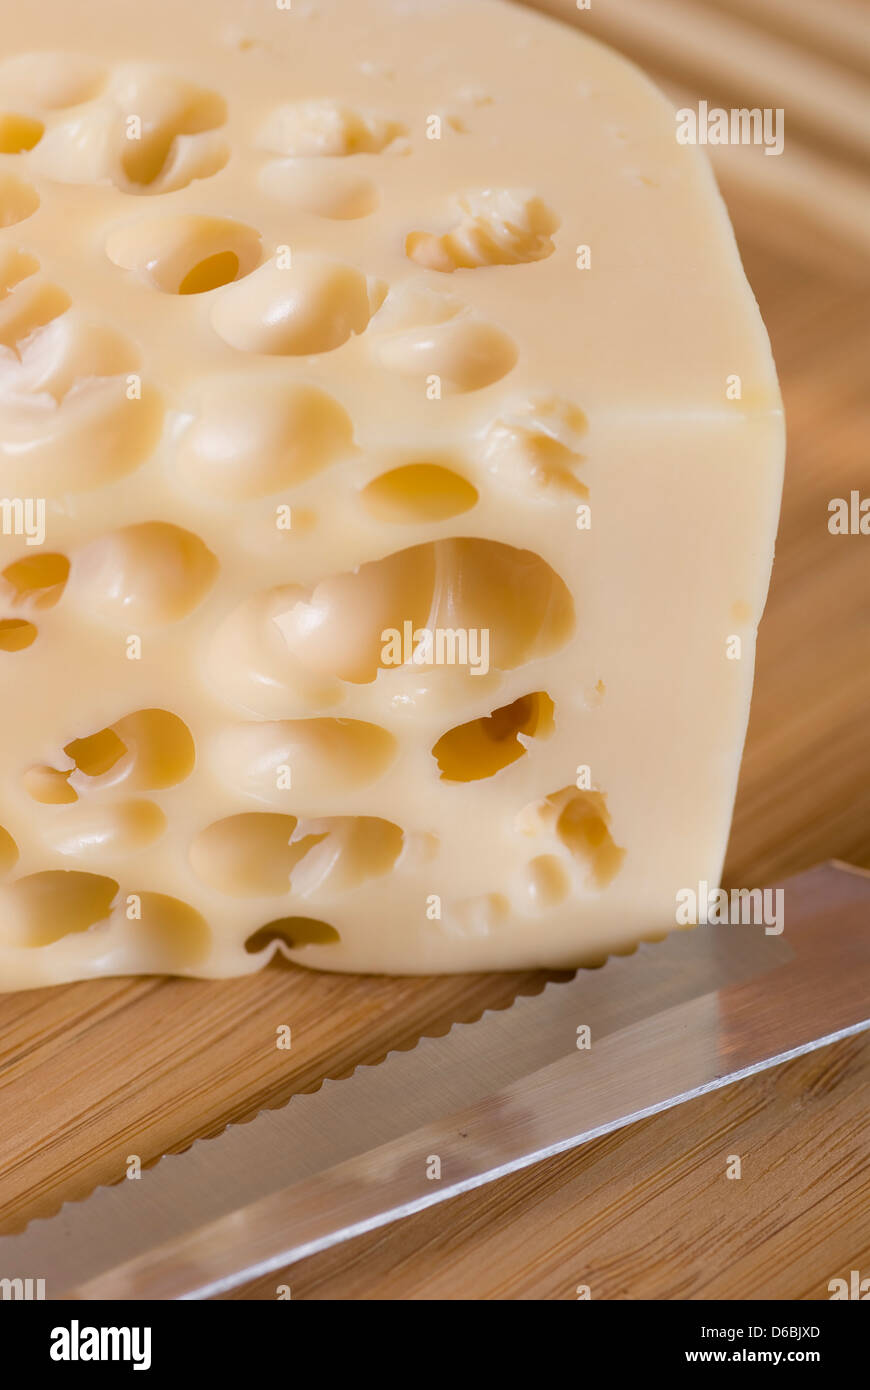 yellow cheese with large holes on plank Stock Photo